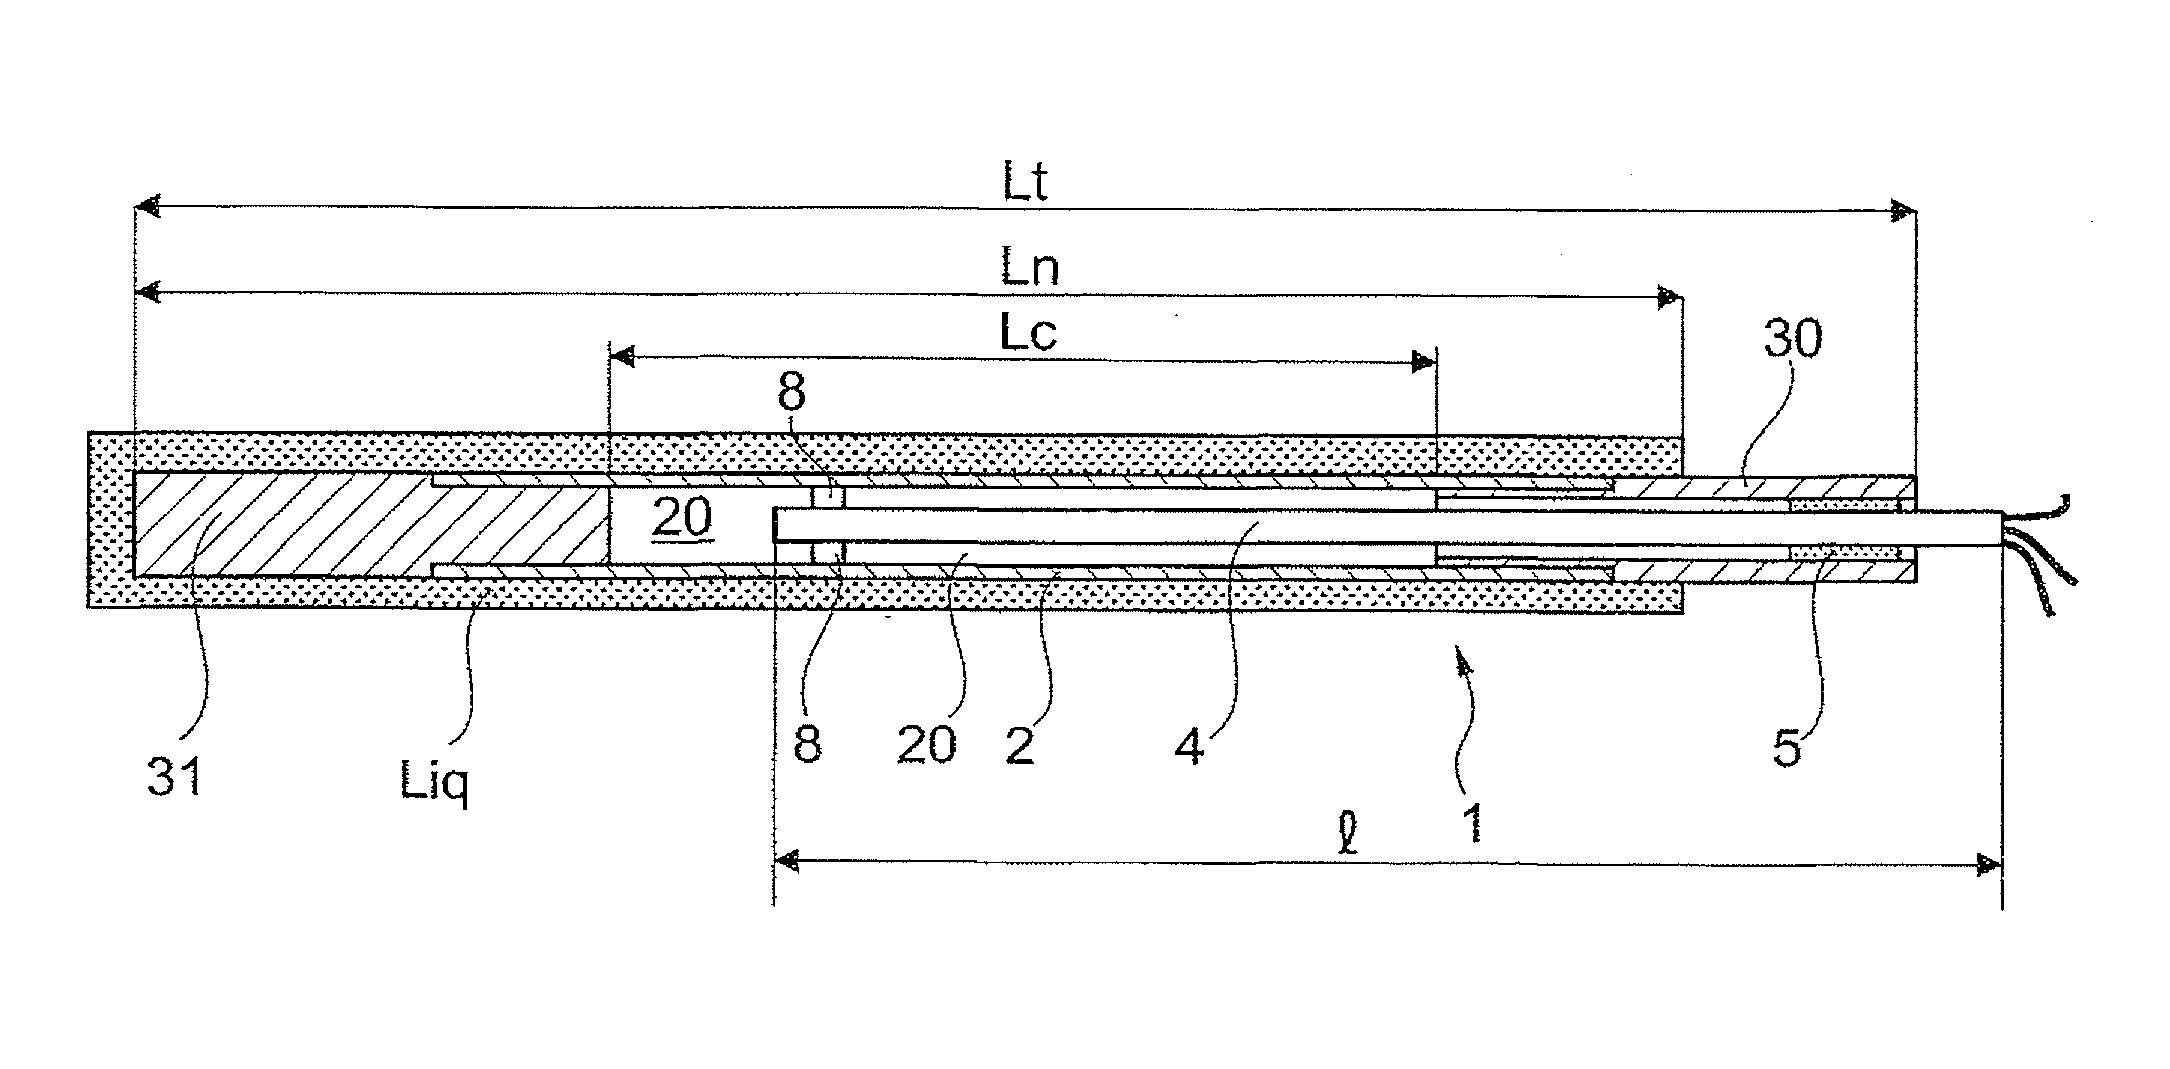 Rod thermometer device for detecting a temperature, use for the electrical simulation of nuclear fuel rods